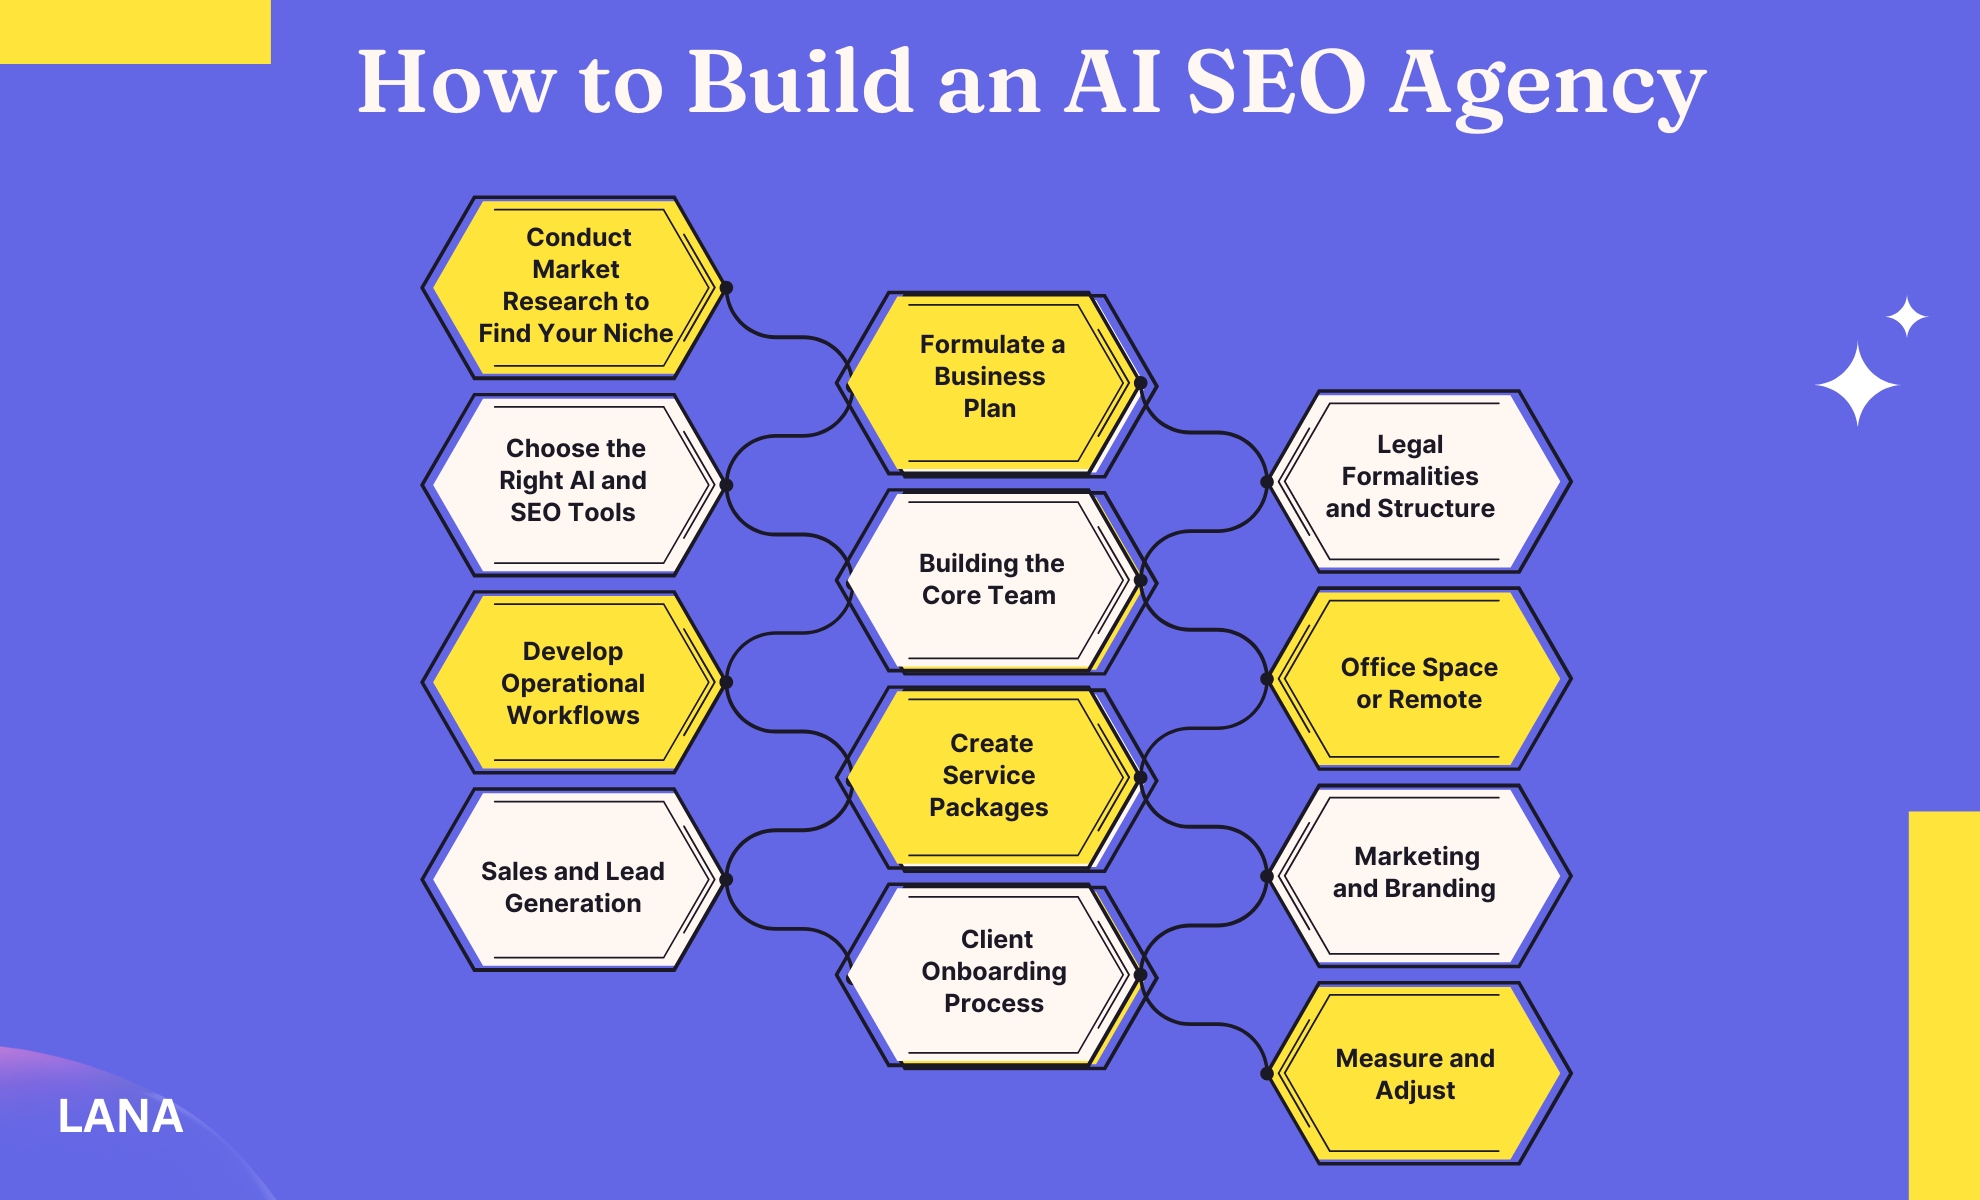 How to Build an AI SEO Agency - Step-by-Step Guide